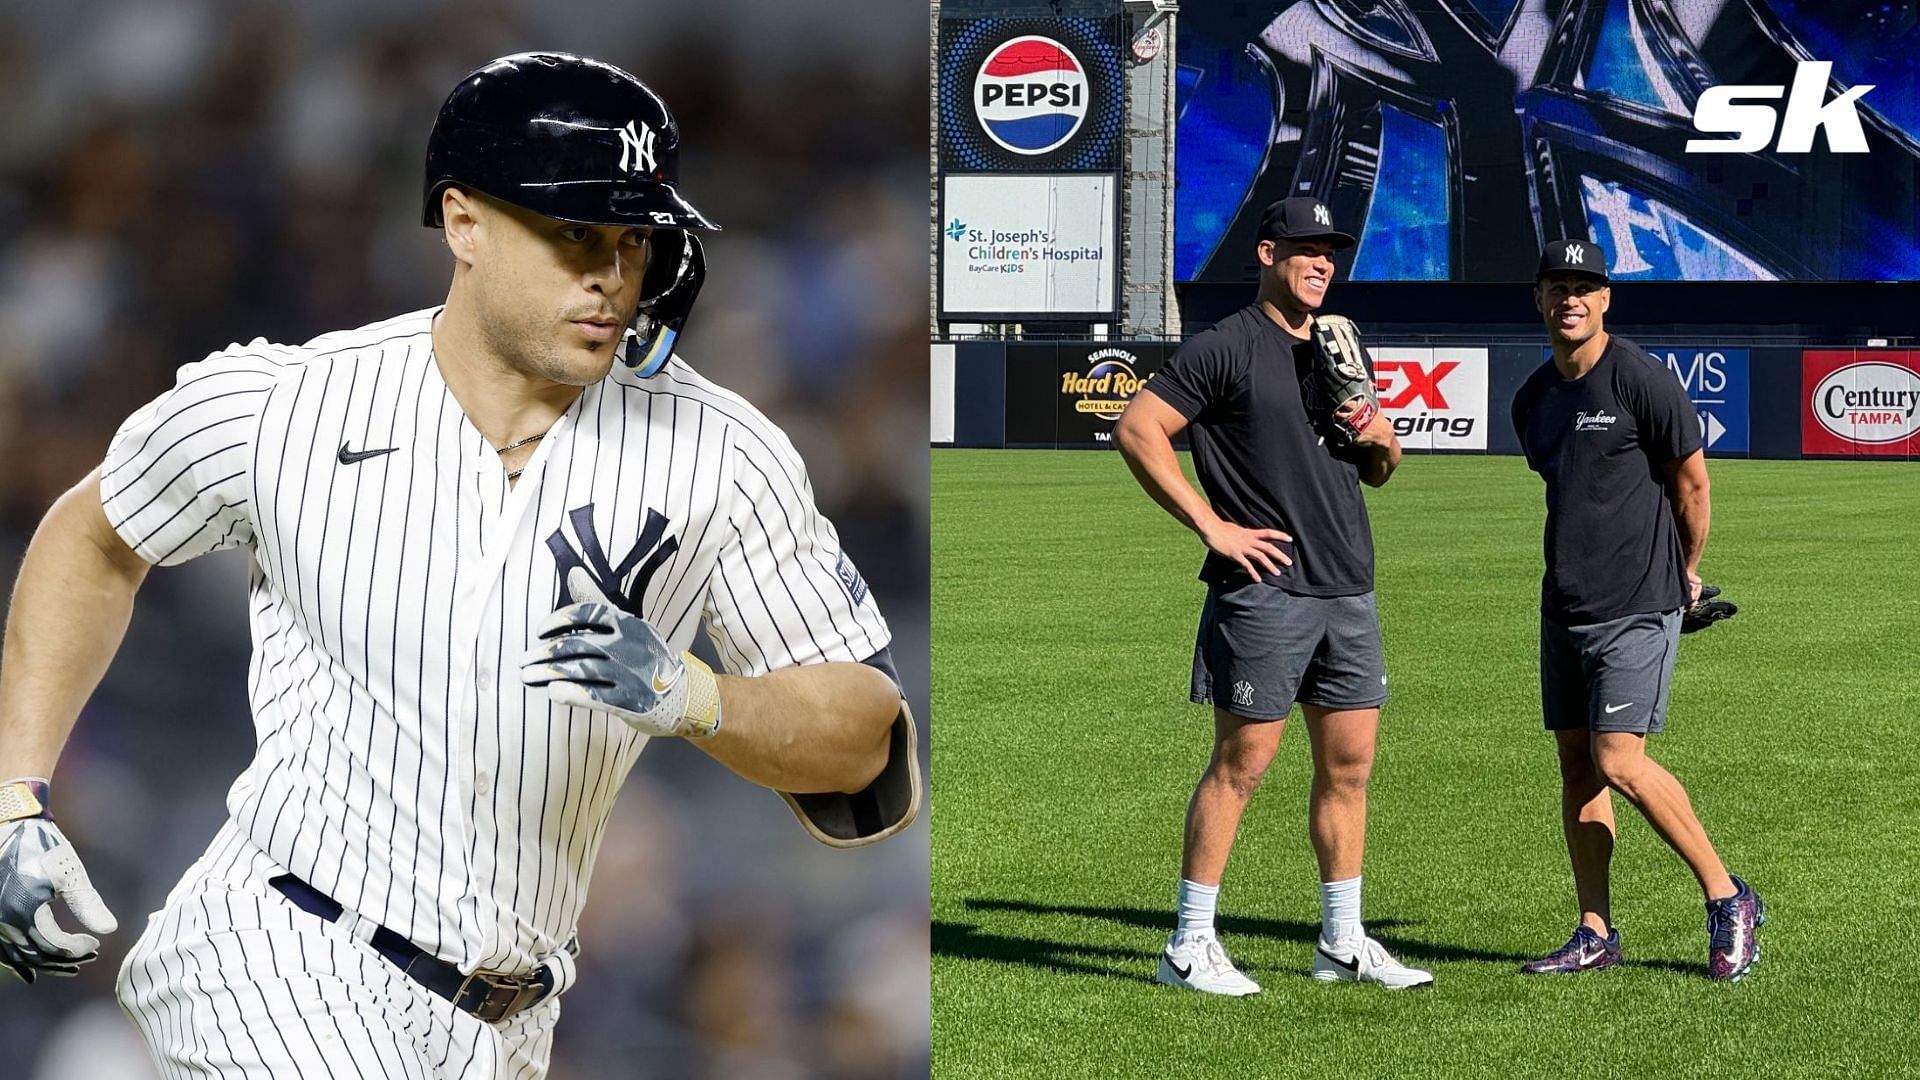 Yankees fans are in shock as photos of slimmer Giancarlo Stanton have emerged online